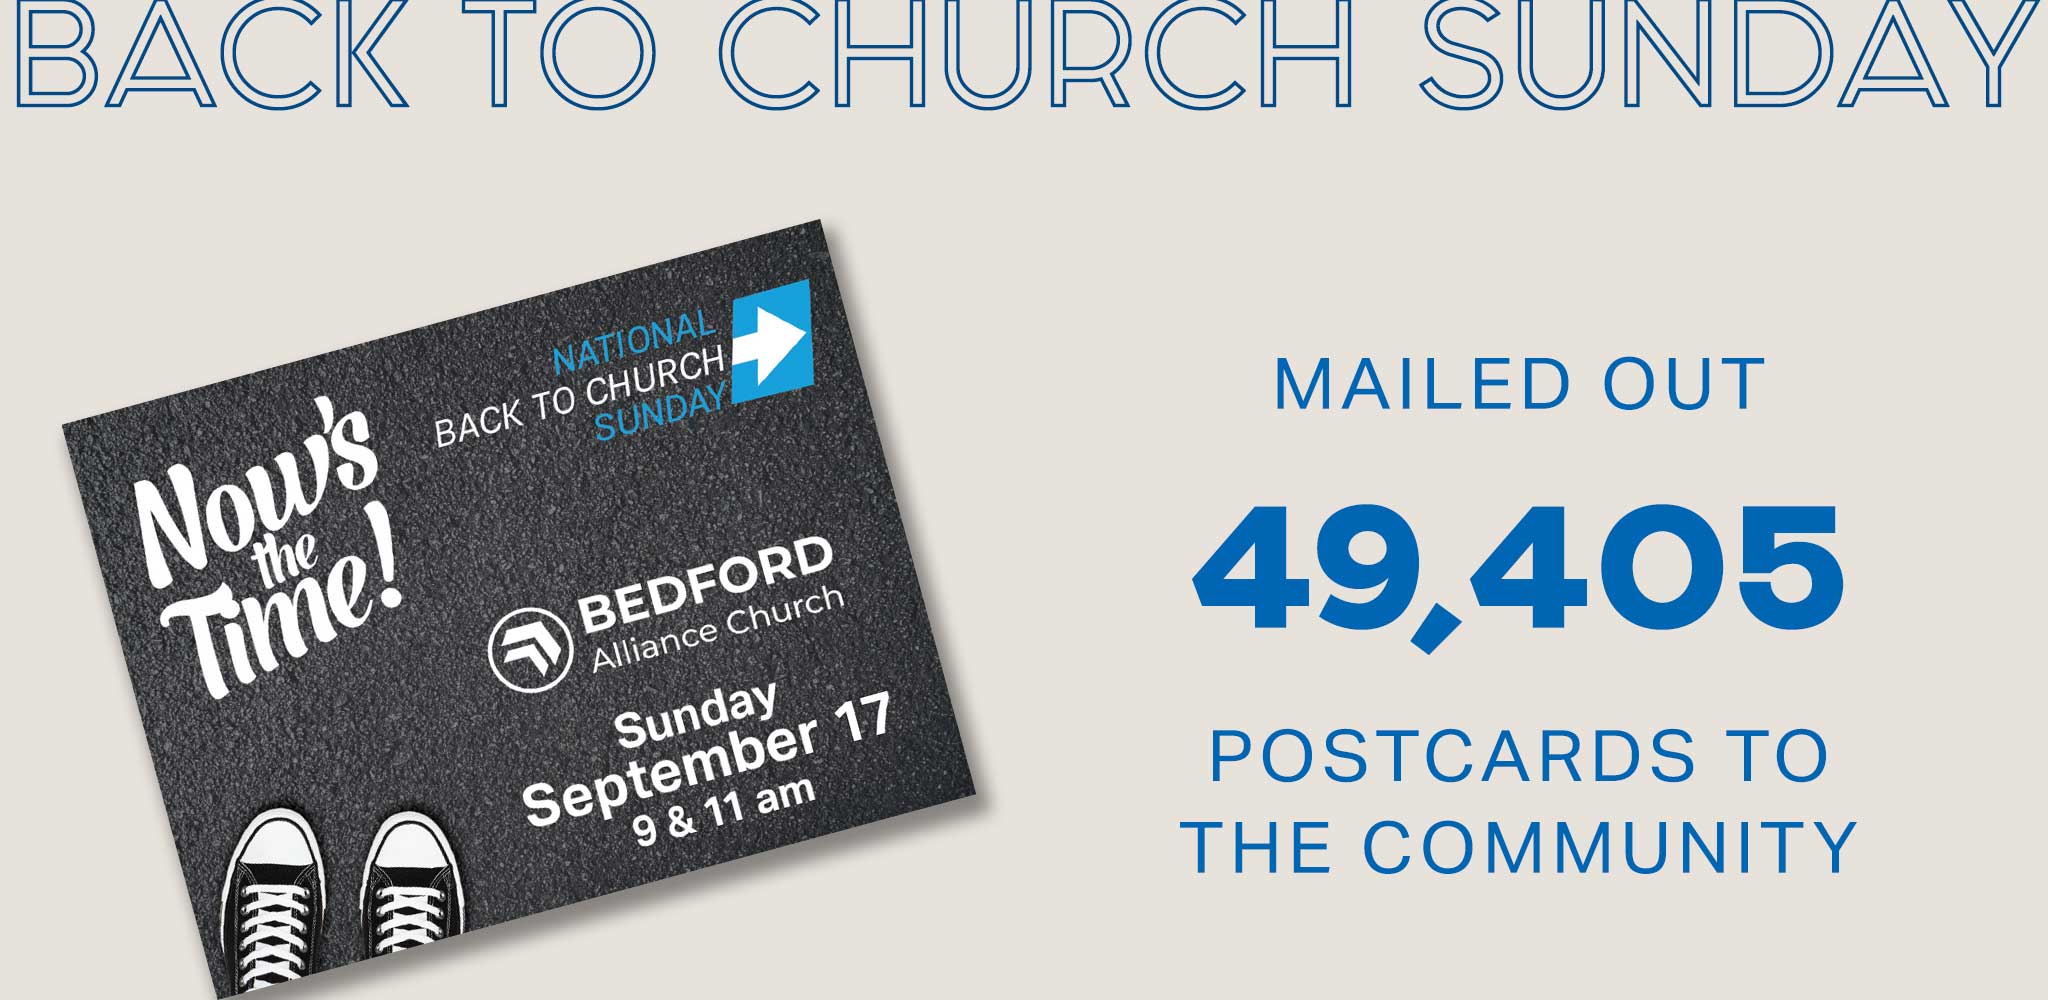 We mailed out 49,405 postcards to the community for Back to Church Sunday.